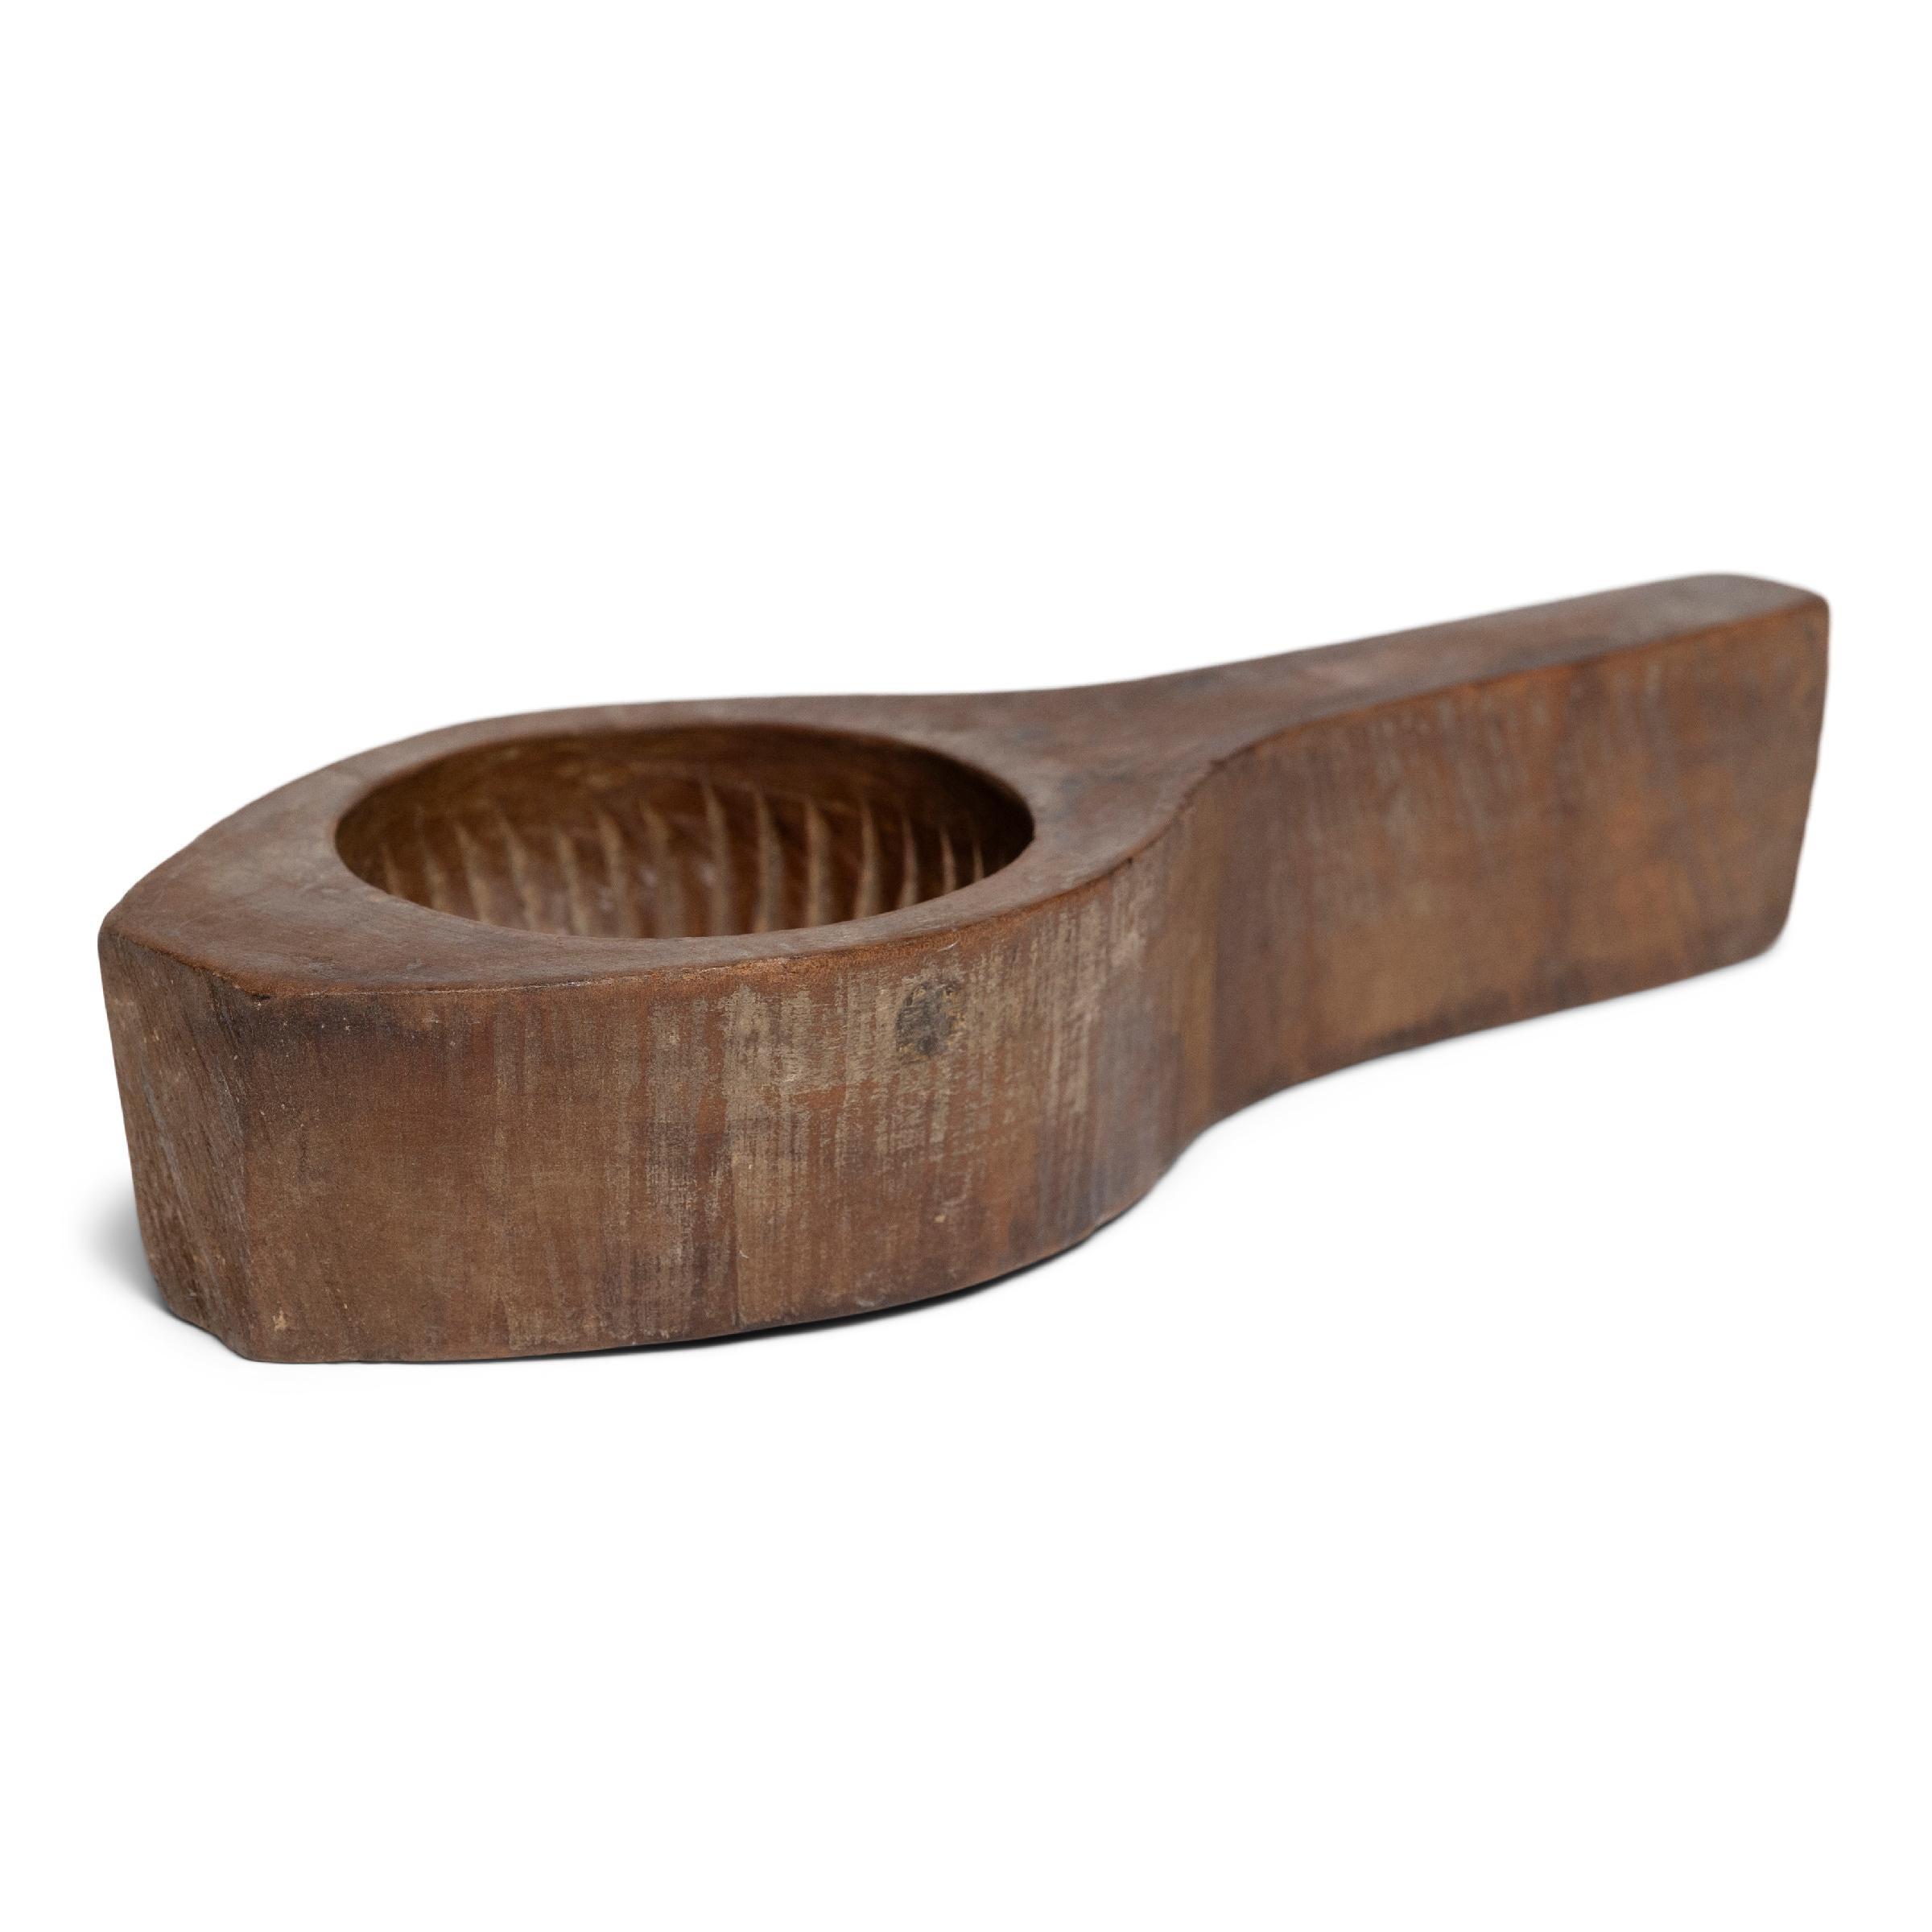 This late 19th century hand-held wood press is carved with a large mold used for shaping festive mooncakes. Packed with lotus root, red bean, or other regional fillings, mooncakes are a delicacy eaten during the Mid-Autumn Festival as an offering